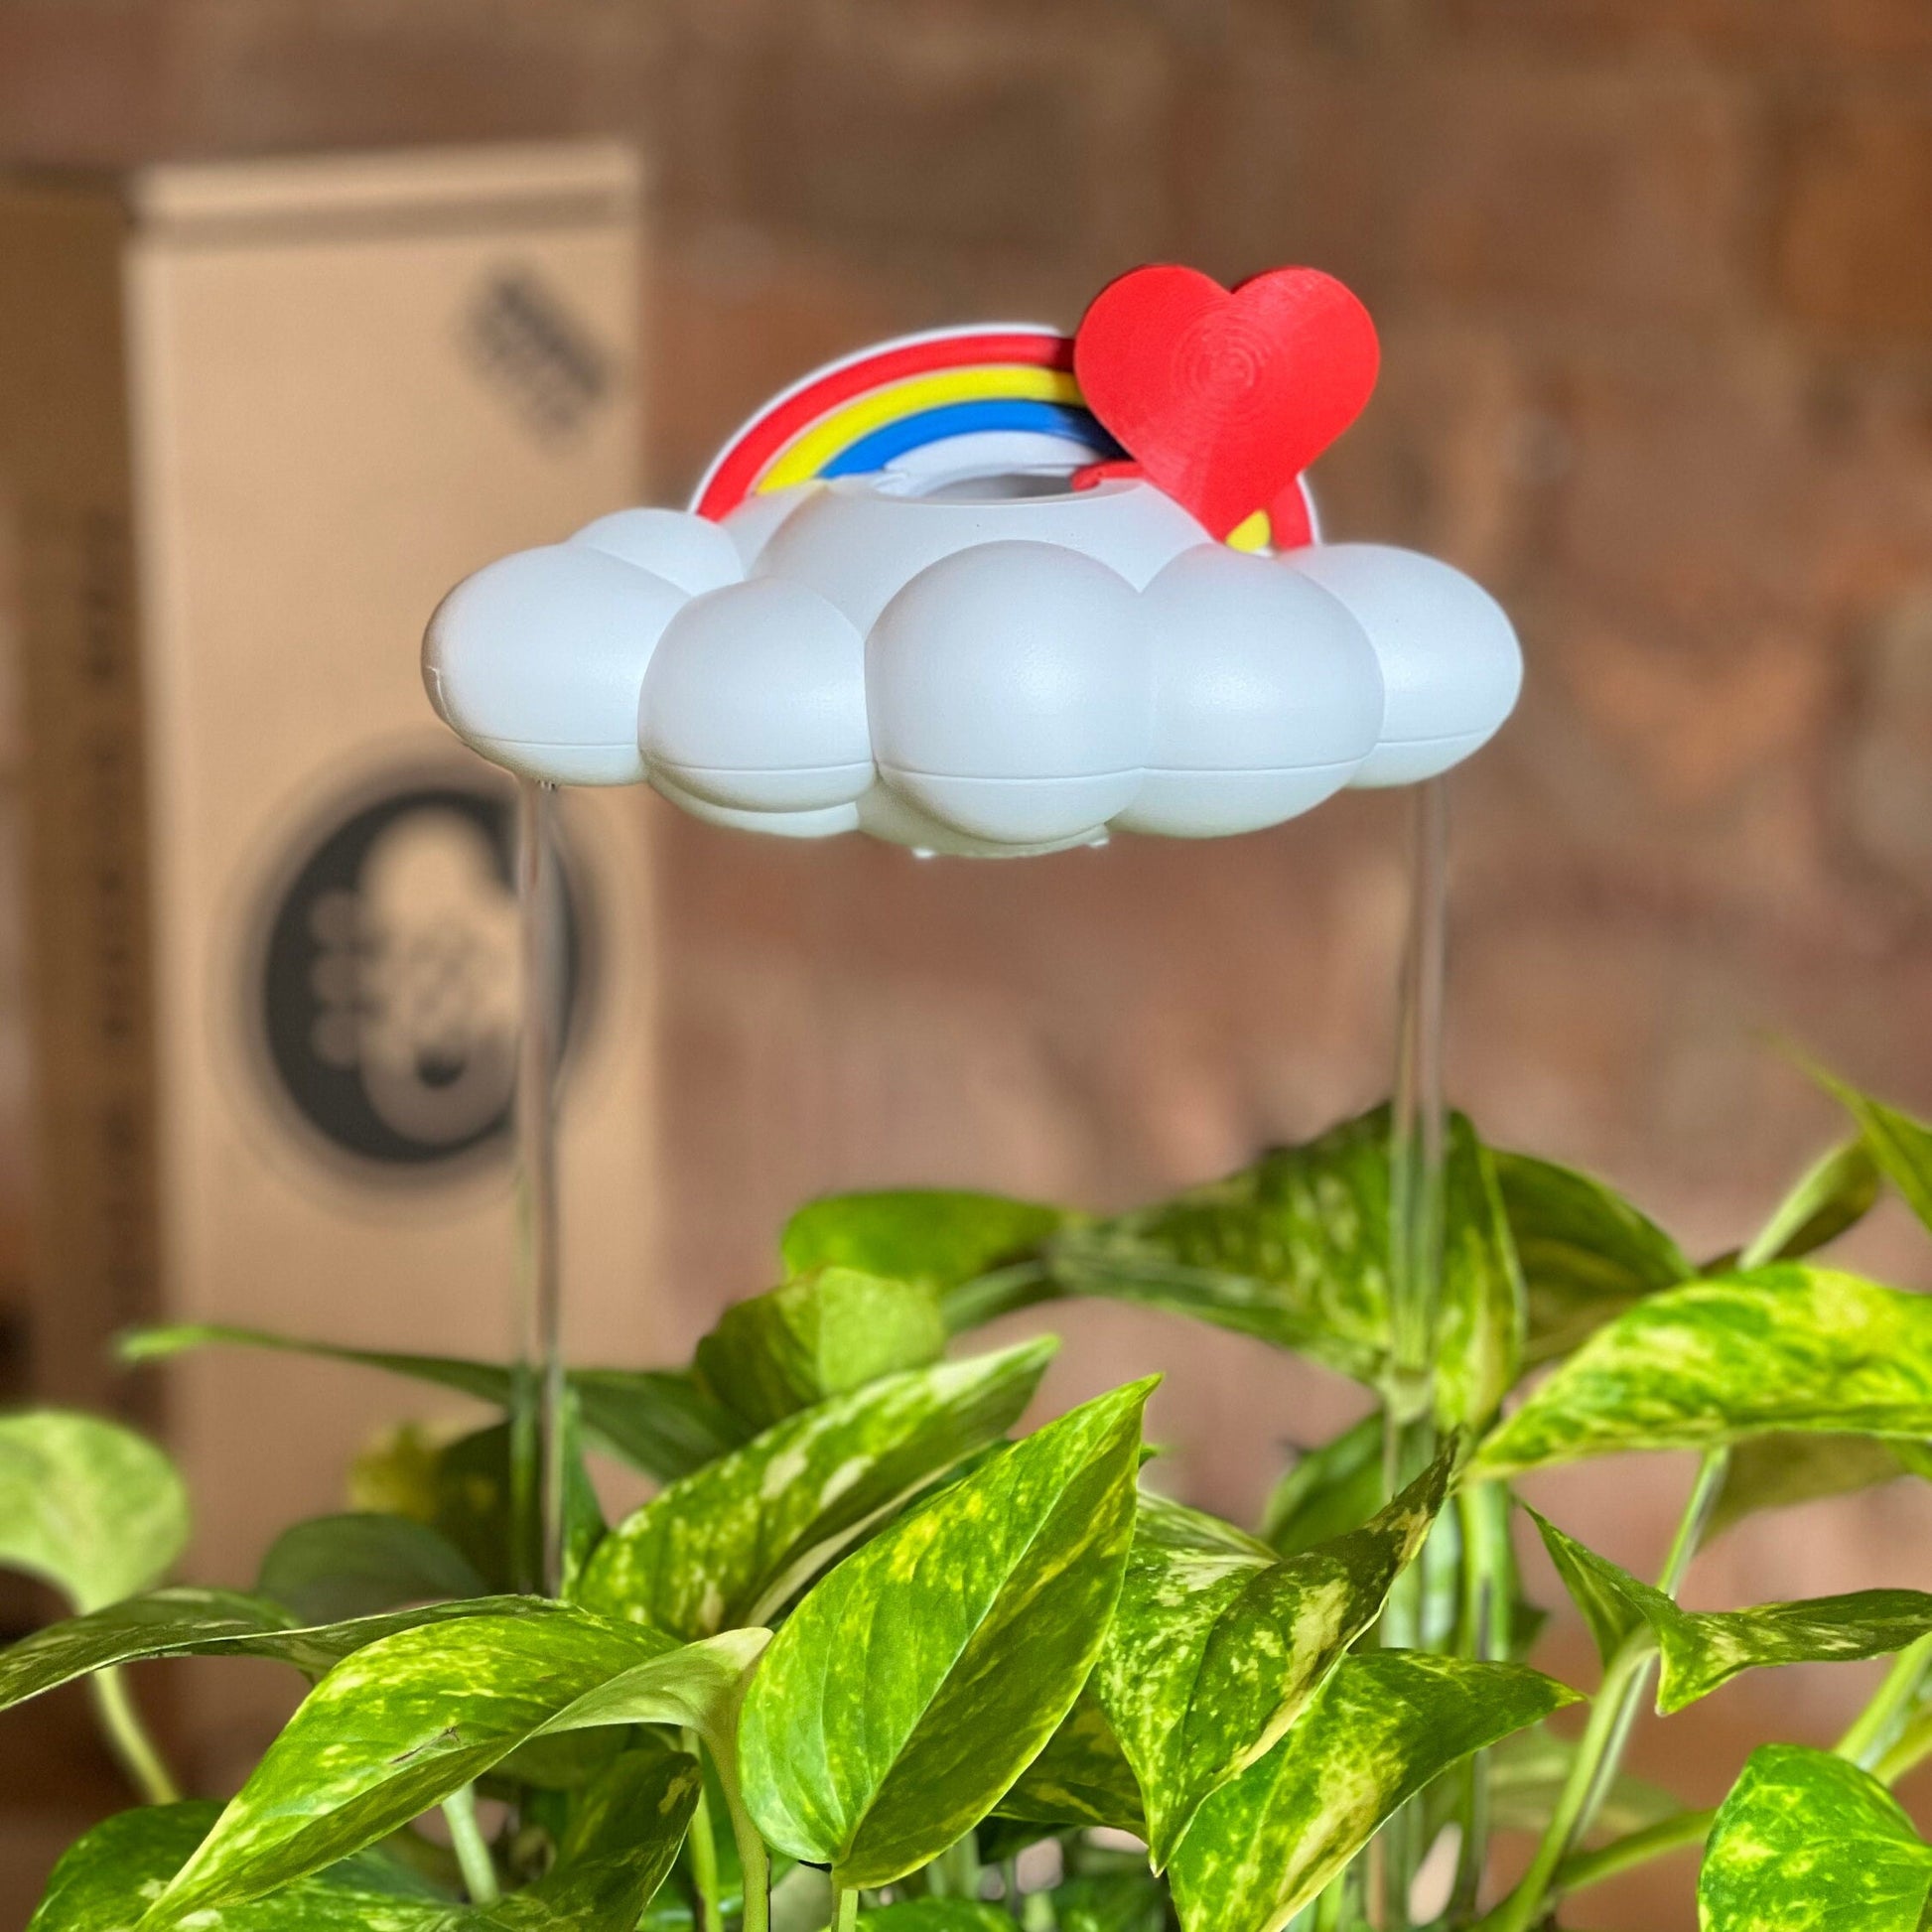 Original Dripping Rain Cloud with Red Heart and rainbow charms